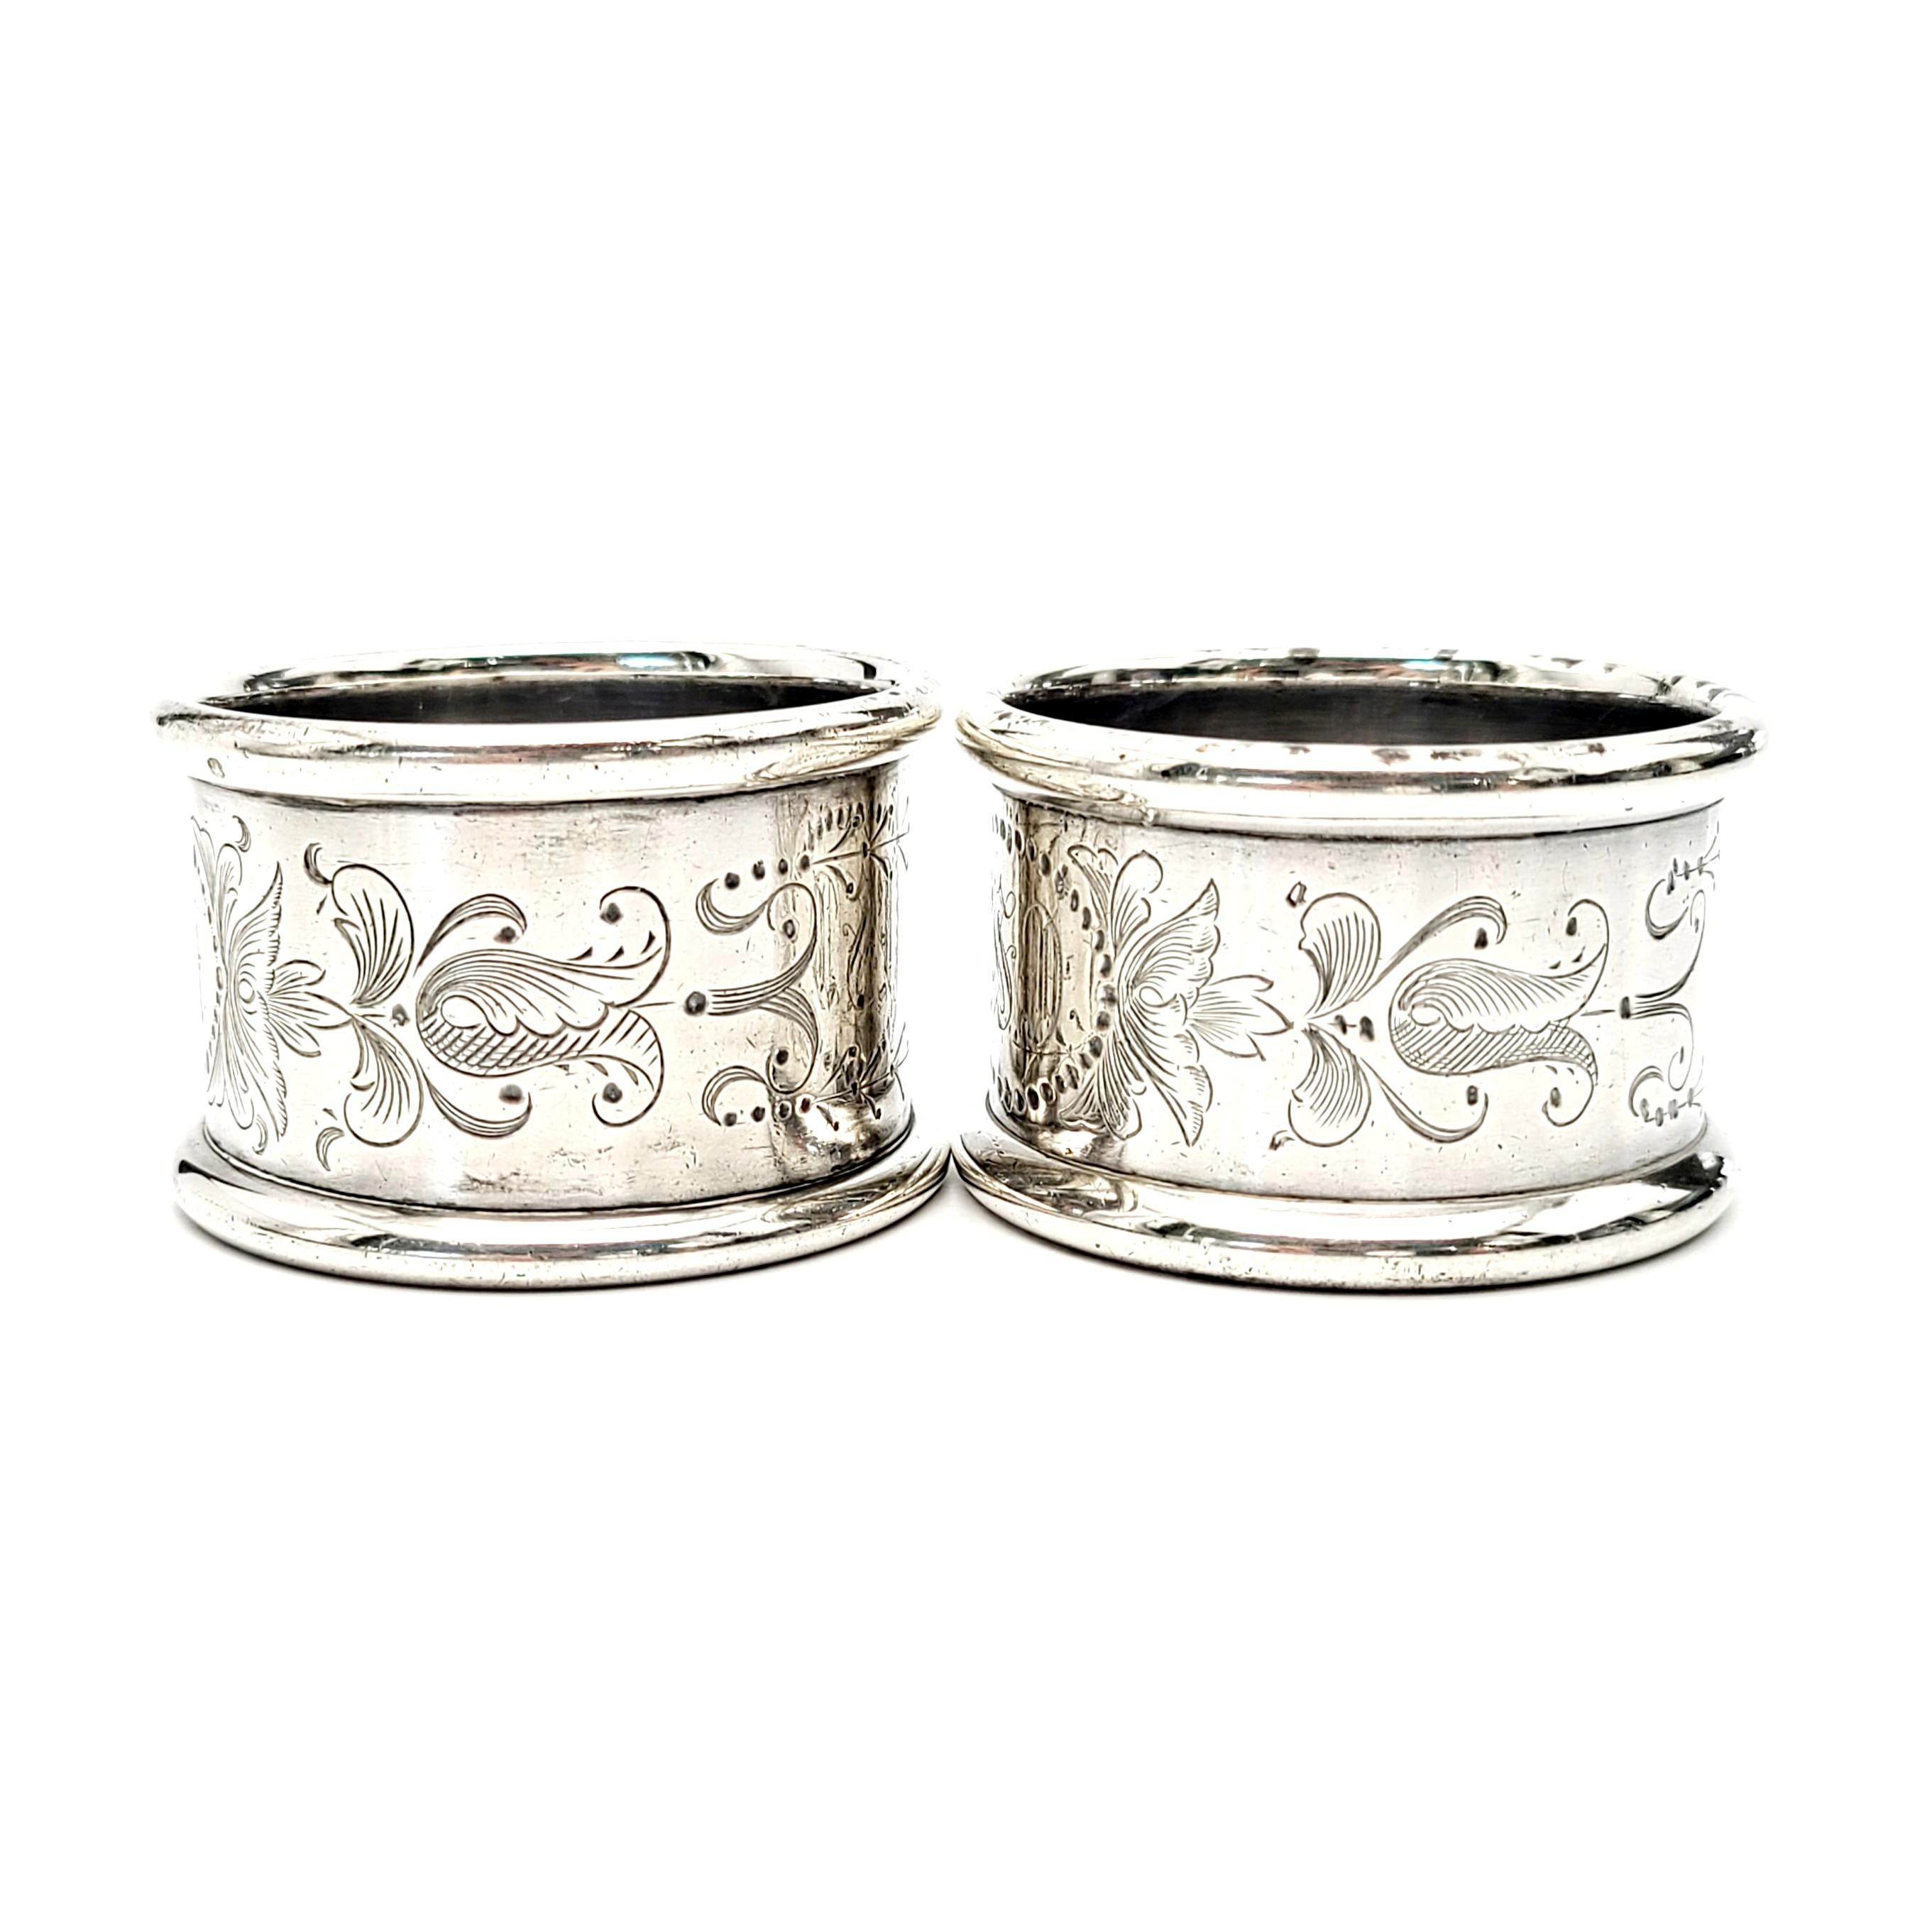 Set of 2 sterling silver napkin rings by Towle.

Etched scroll and leaf design all around each ring. Monogram inside a dotted oval on each ring.

On one ring, monogram on the outside appears to be a EAI, inside monogram appears to be ASJ. On the